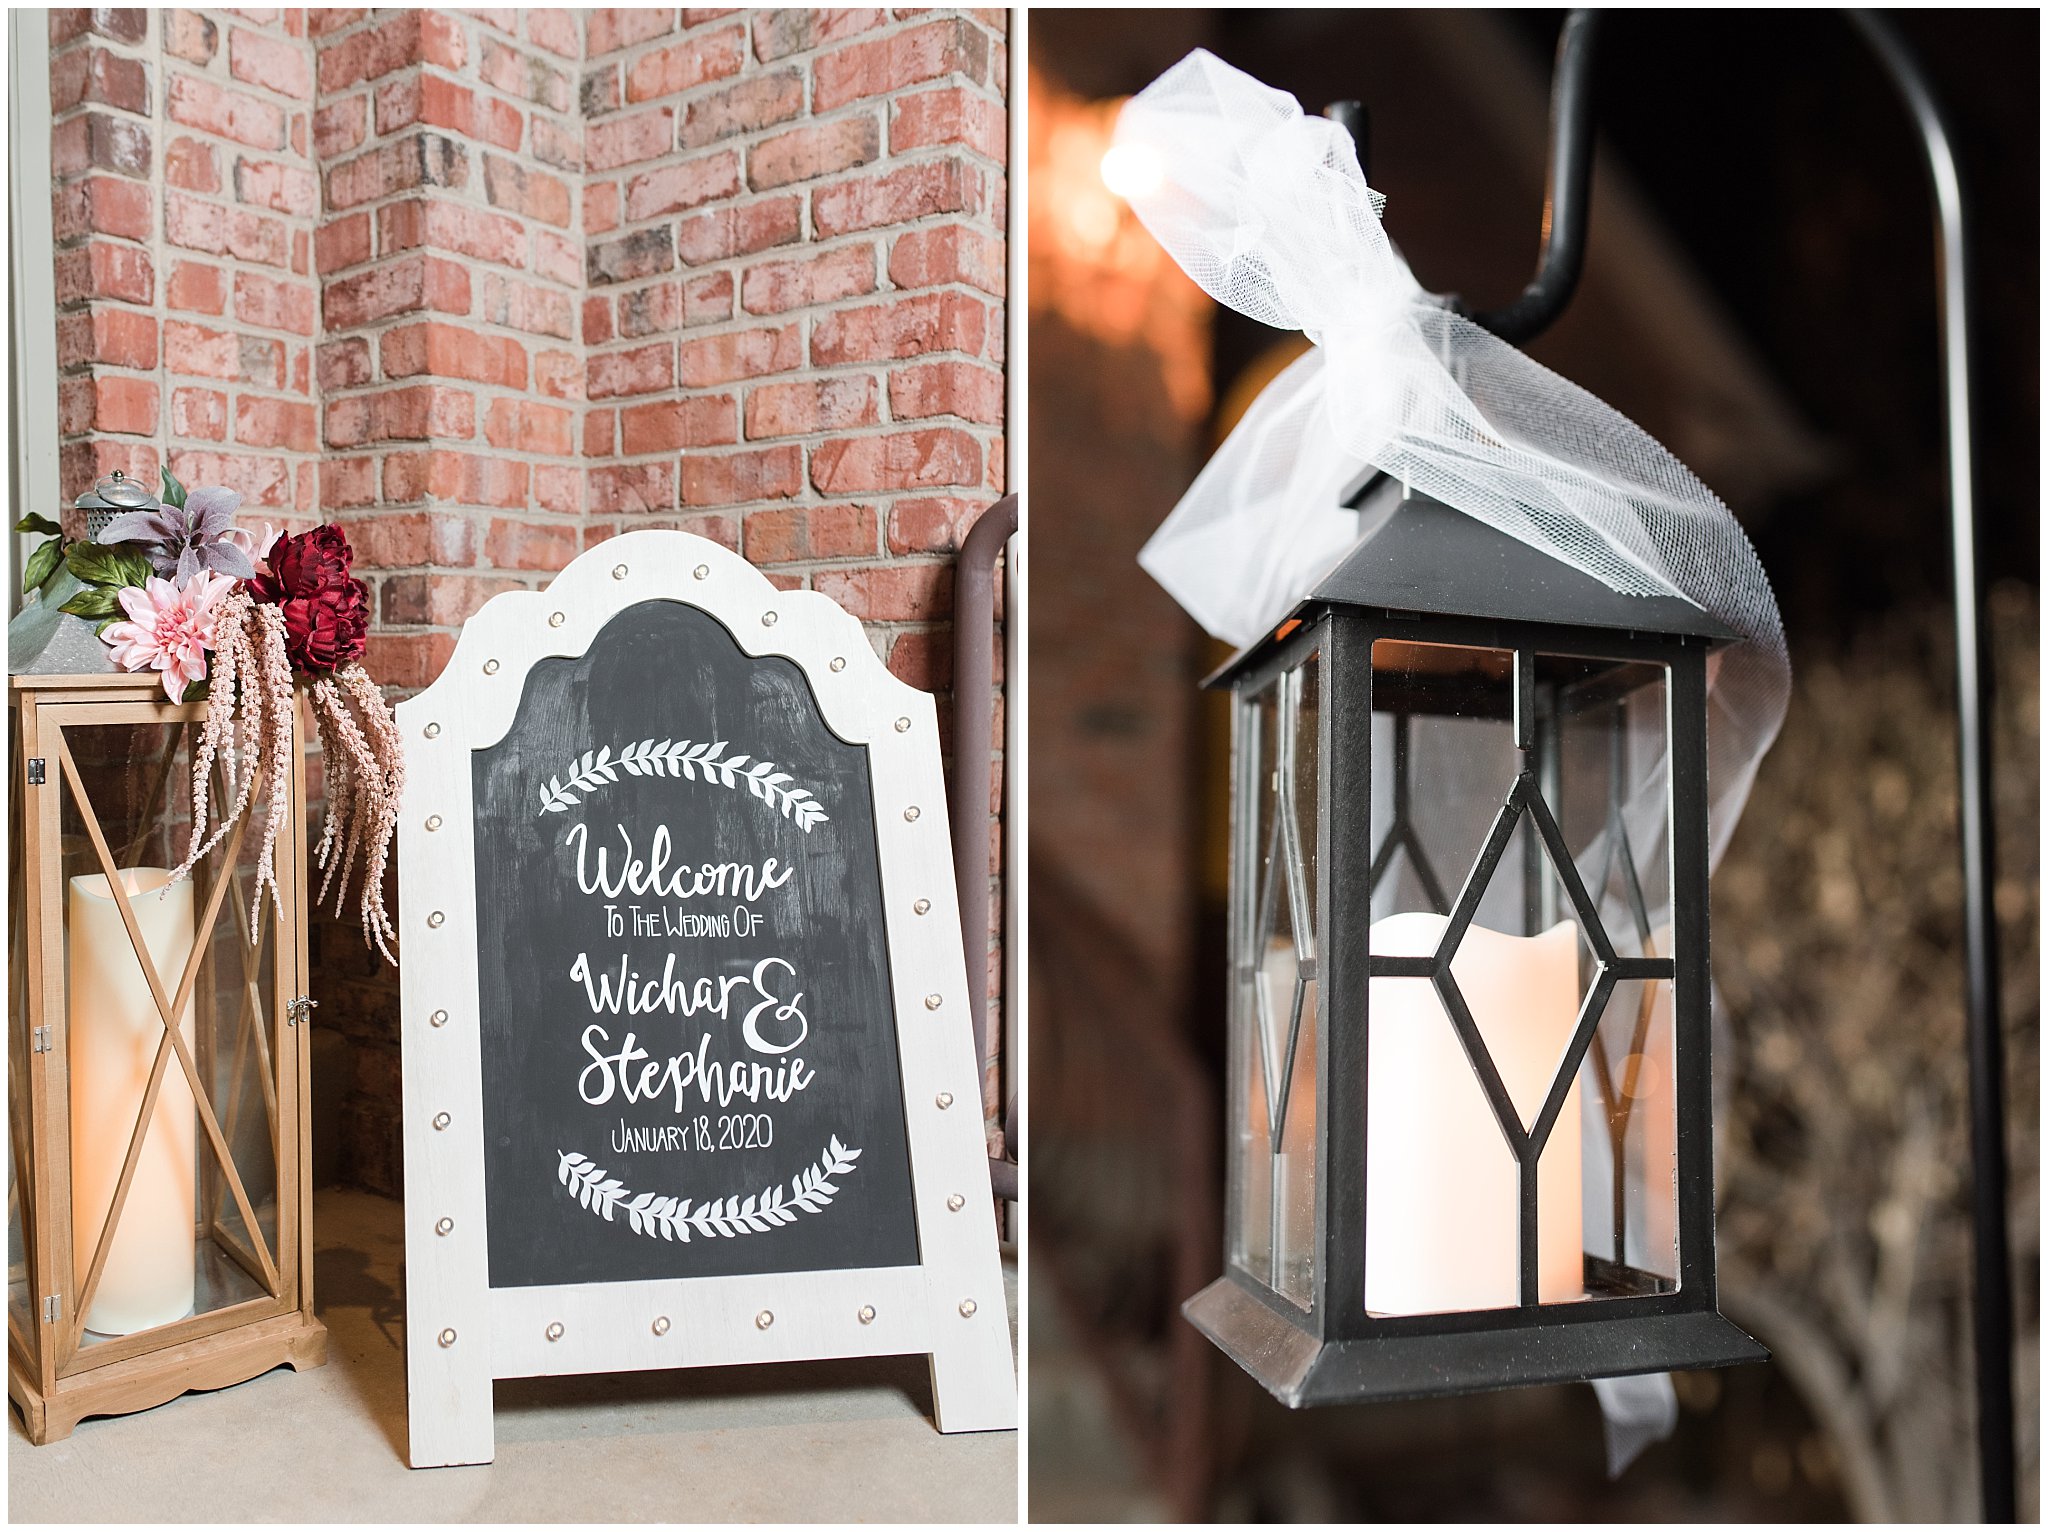 Lantern decor for sparkler exit and chalkboard welcome sign | Jordan River Temple Winter wedding and reception | Jessie and Dallin Photography